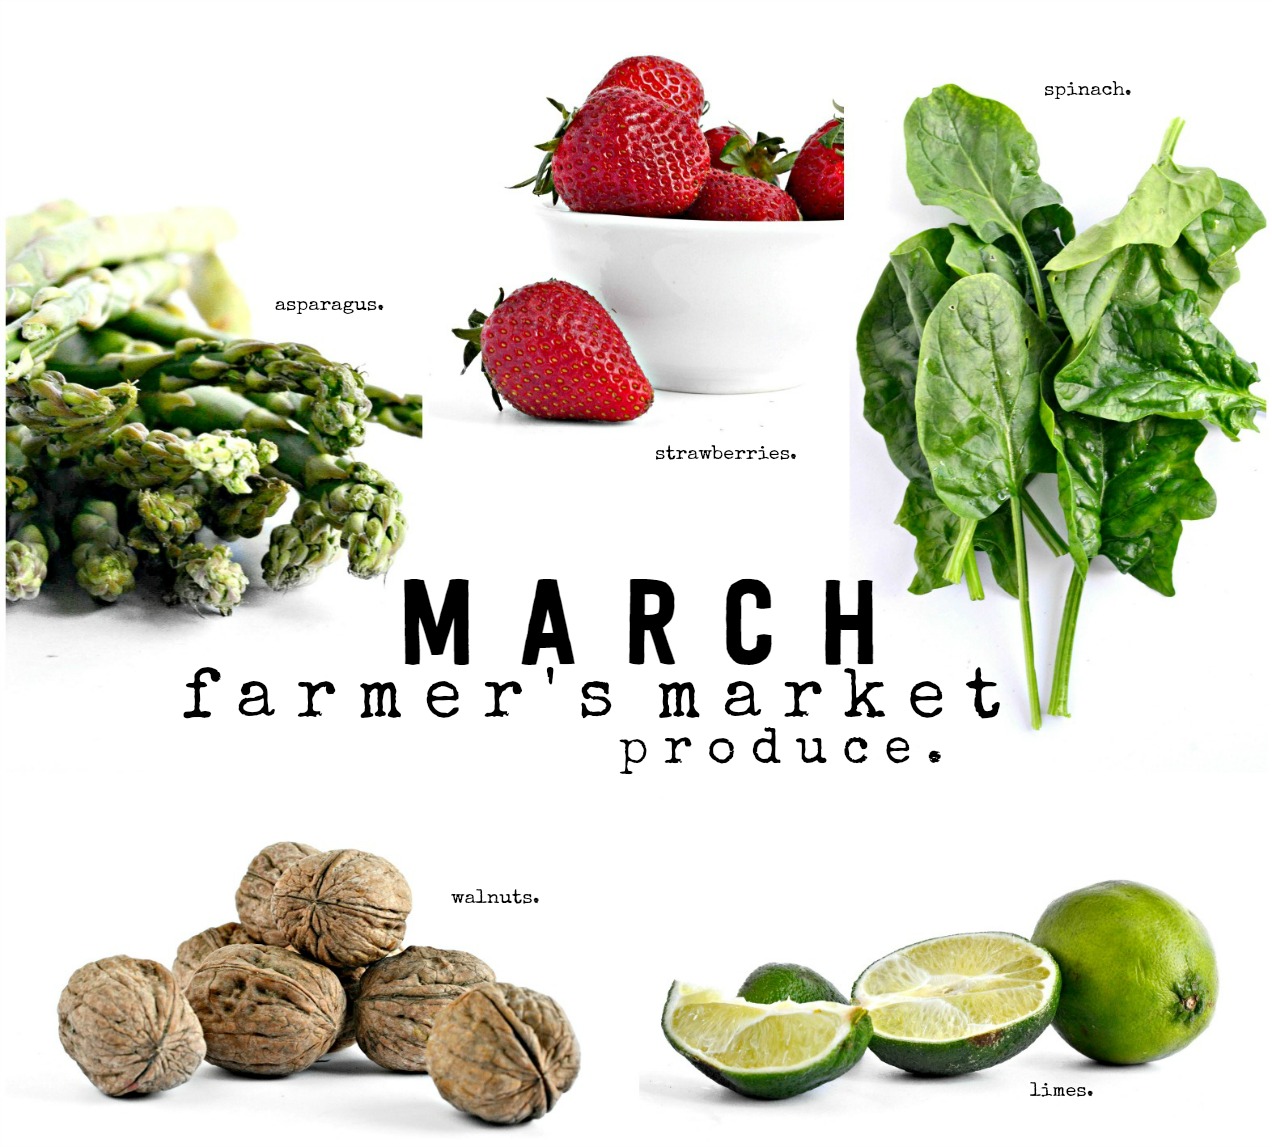 What's In Season for March: Your guide to seasonal produce